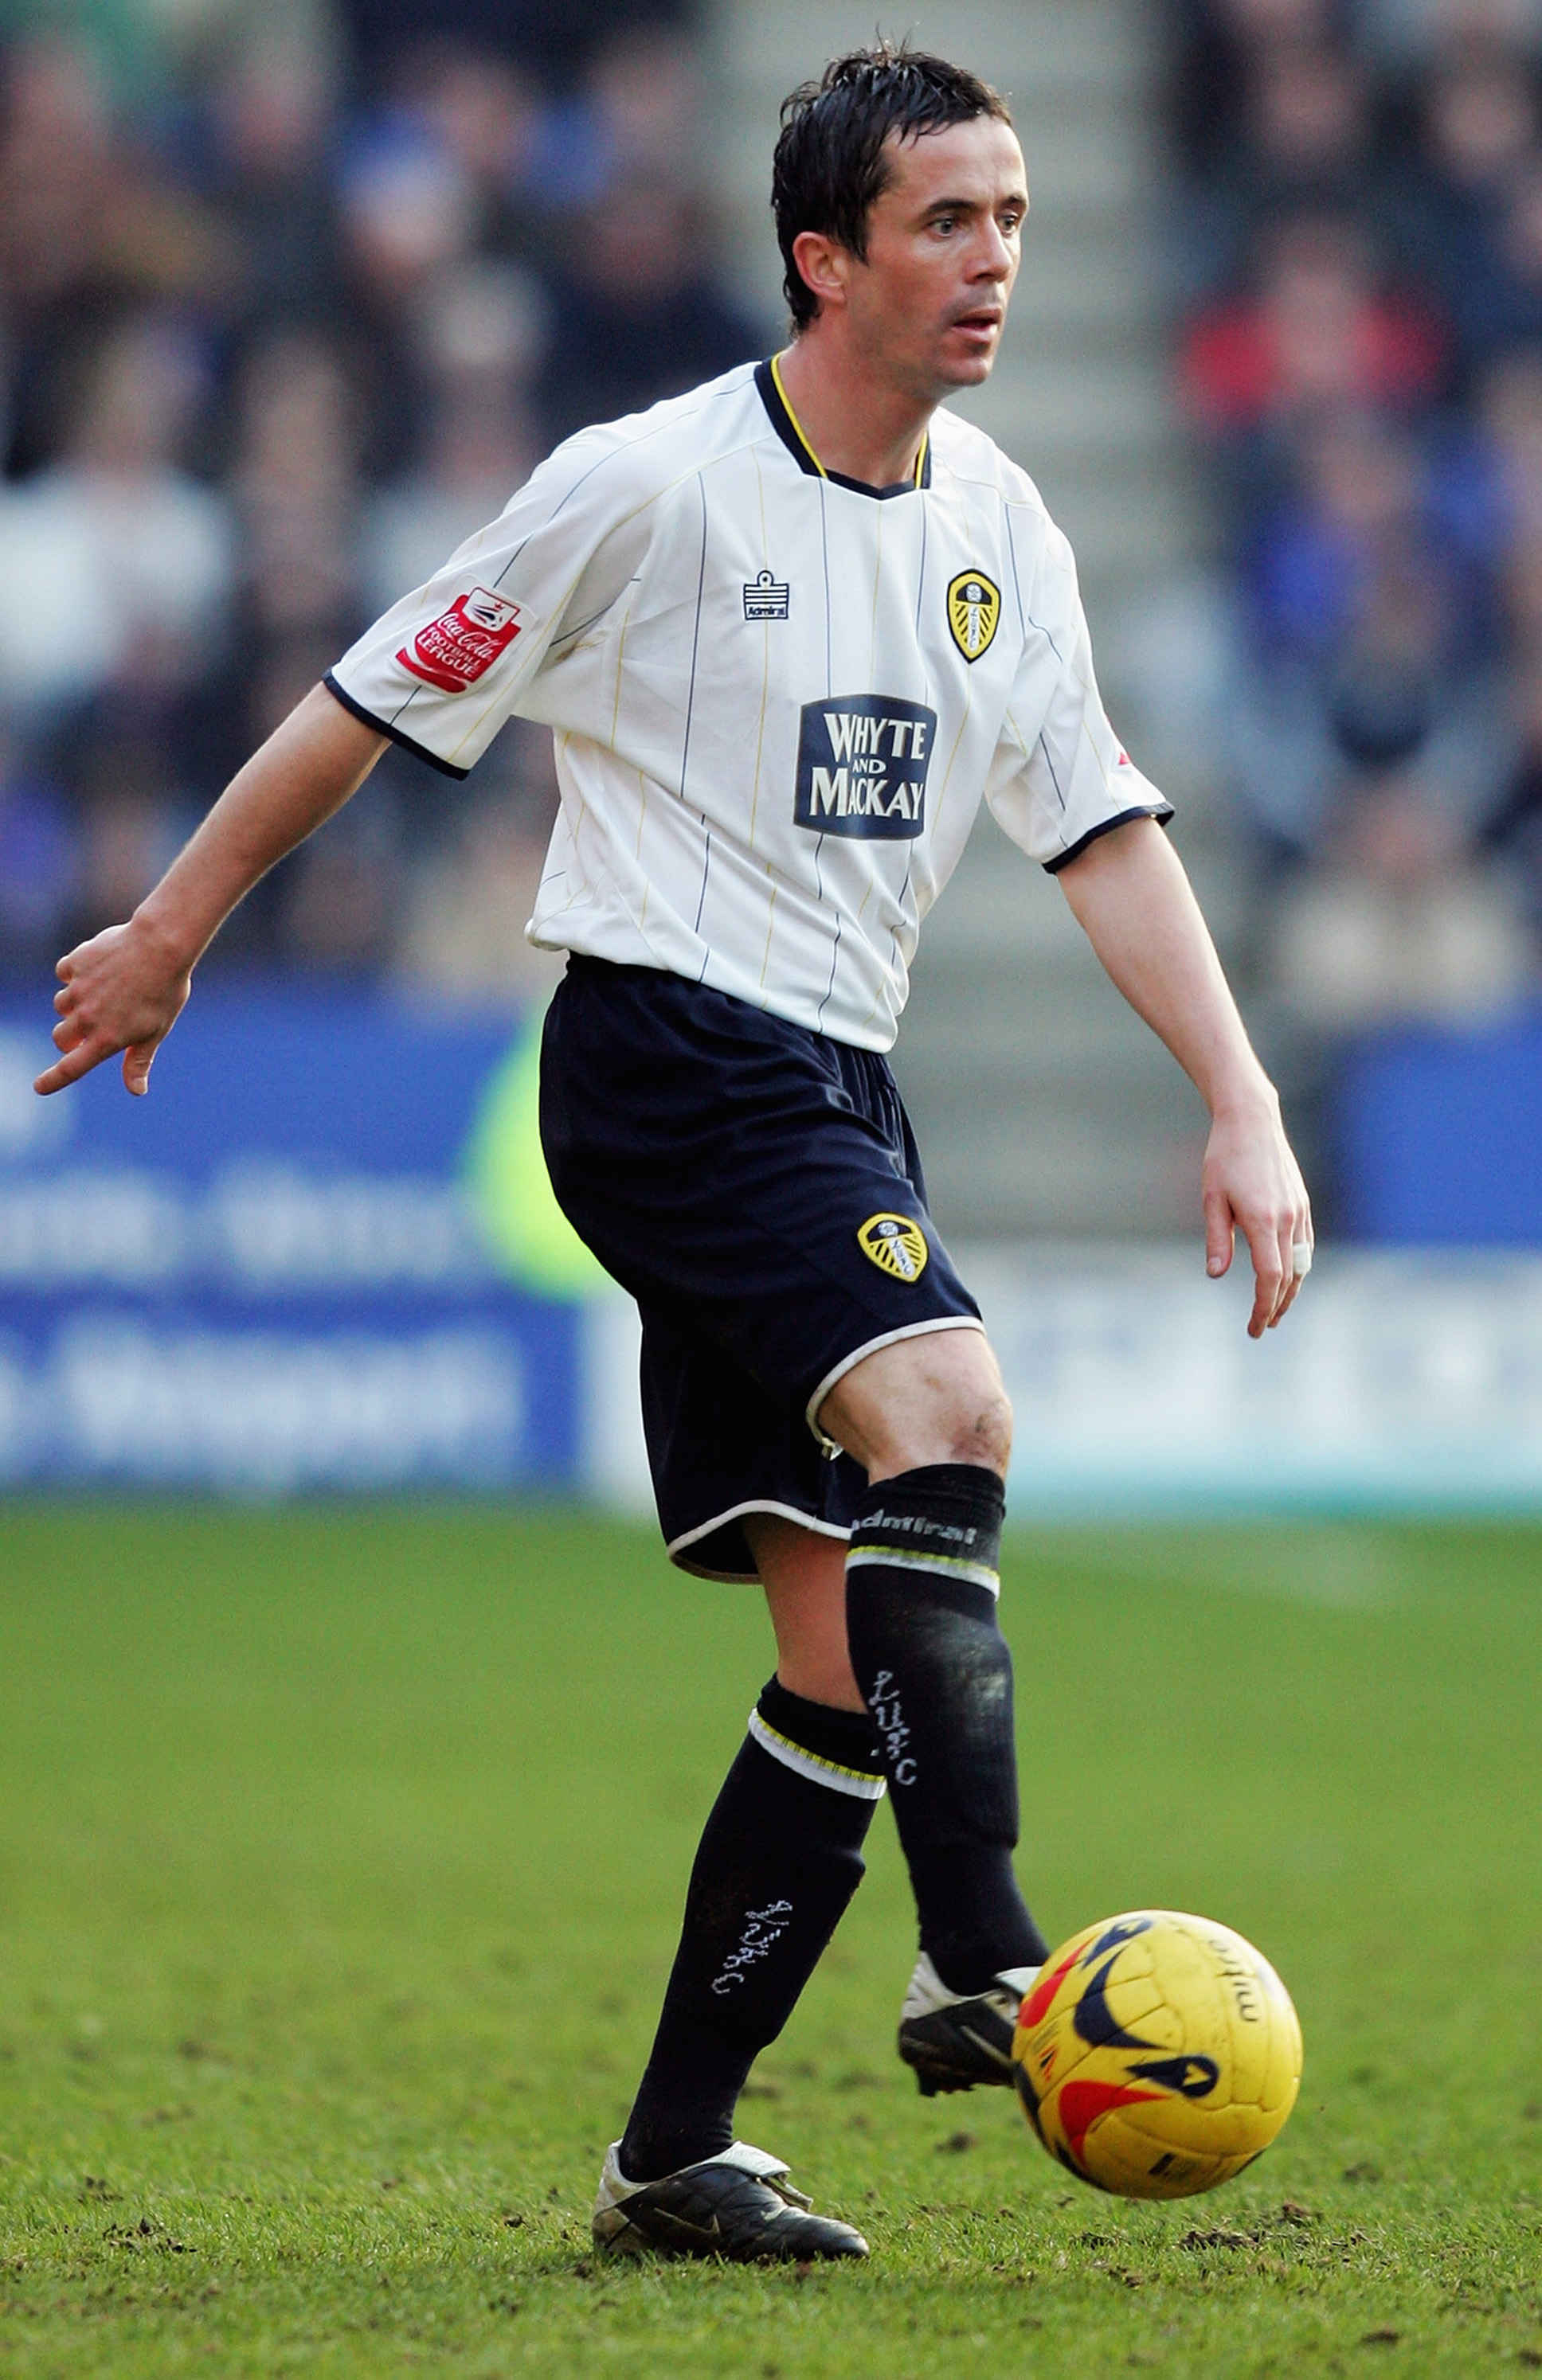 LEICESTER, UNITED KINGDOM - FEBRUARY 18:  Gary Kelly of Leeds United in action during the Coca-Cola Championship match between Leicester City and Leeds United at the Walkers Stadium on February 18, 2006 in Leicester, Engalnd.  (Photo by Ross Kinnaird/Gett